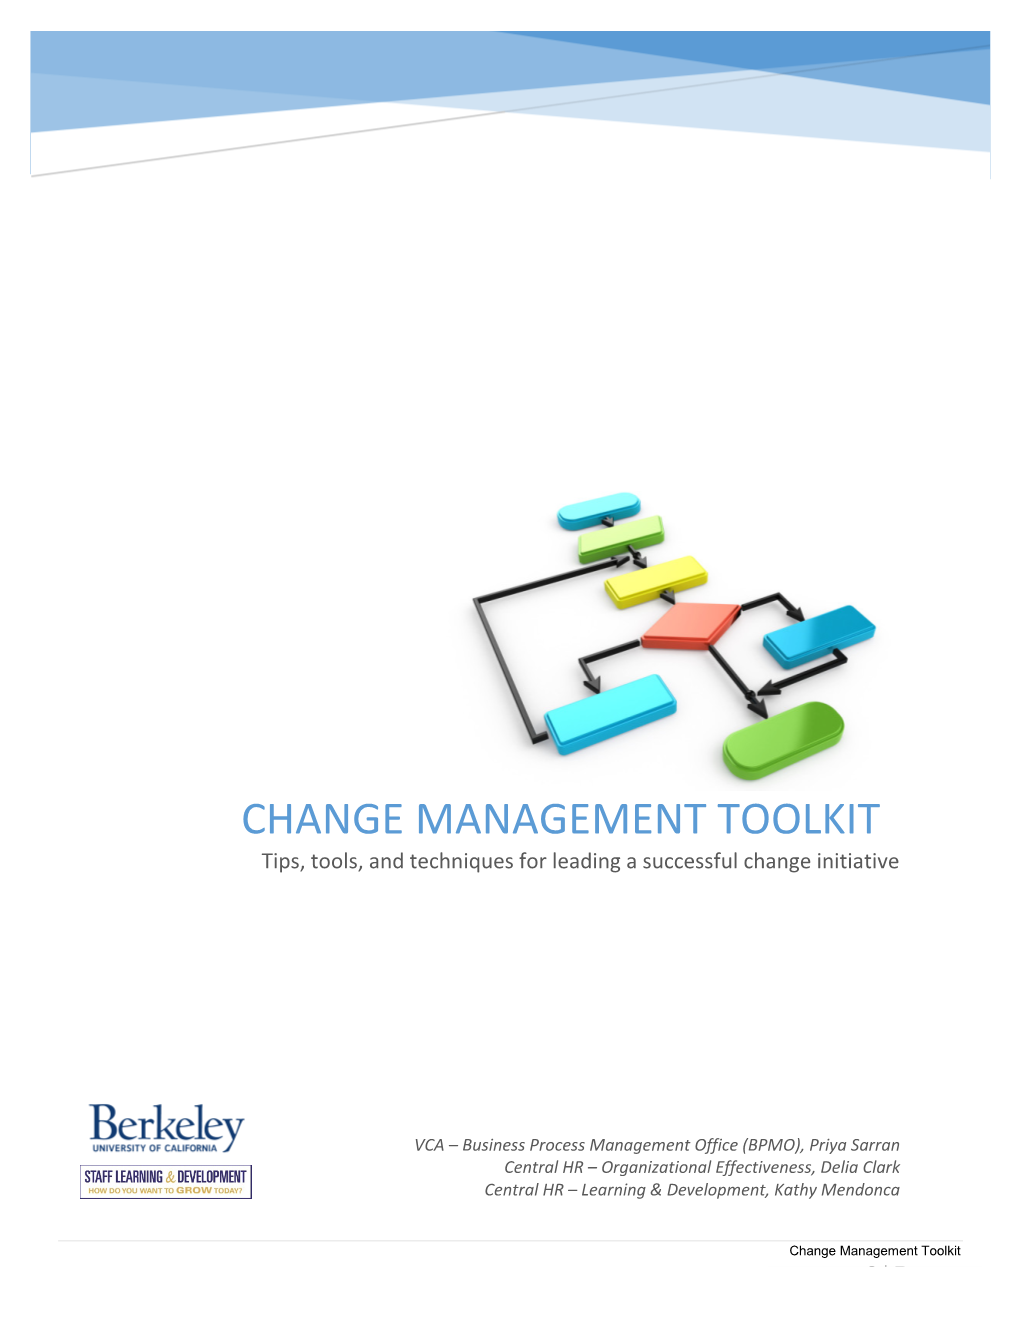 CHANGE MANAGEMENT TOOLKIT Tips, Tools, and Techniques for Leading a Successful Change Initiative